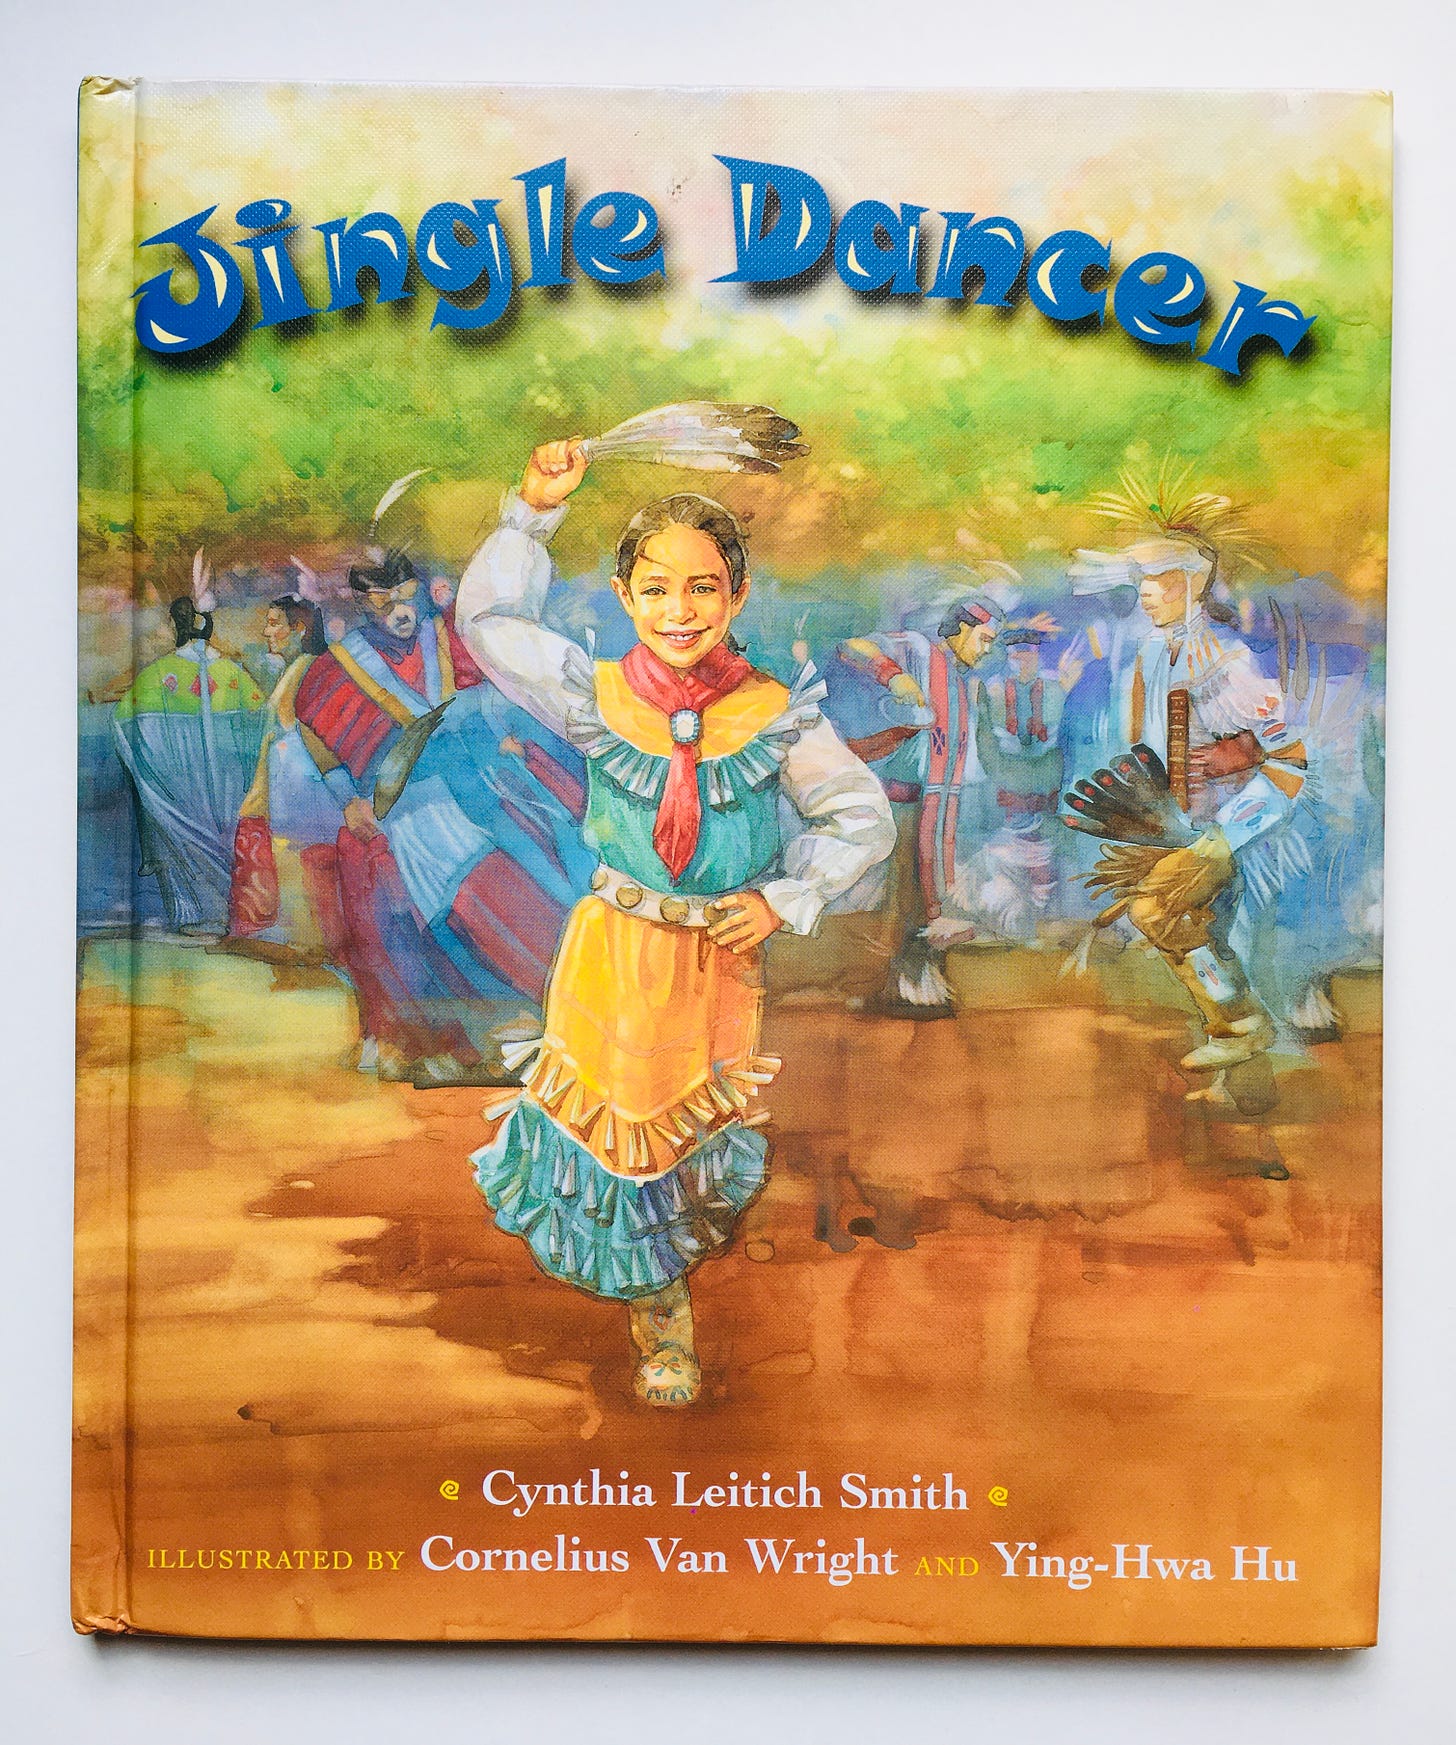 A young Muscogee Creek girl faces the viewer as she performs a jingle dance with others